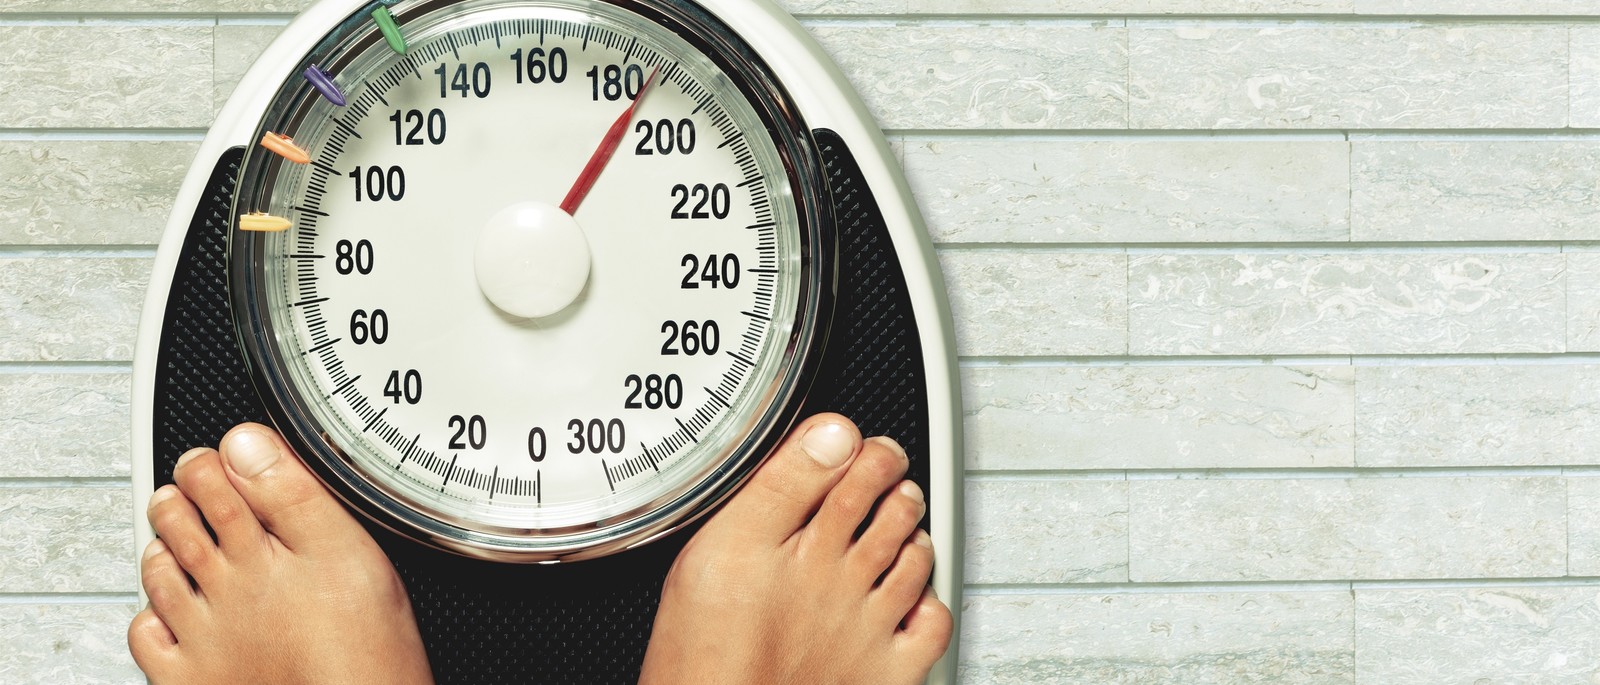 3 reasons why resolving to lose weight is a bad idea